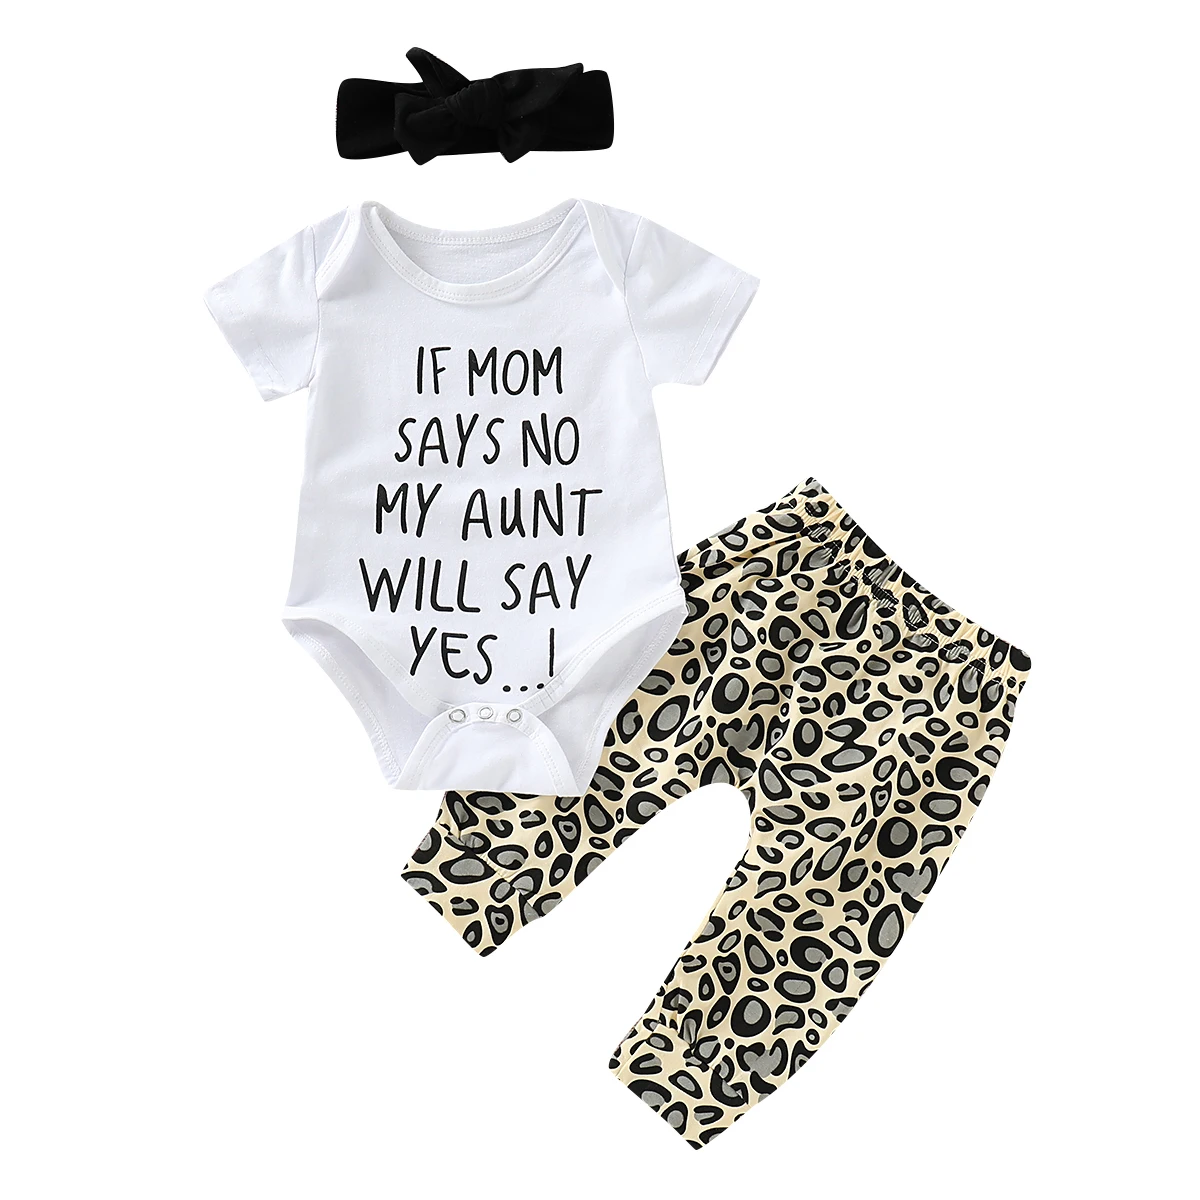 MIOIM 3 pcs Newborn Infant Toddler Baby Girls Christmas Letter Saying Printed Bodysuit Rompers Outfits Set